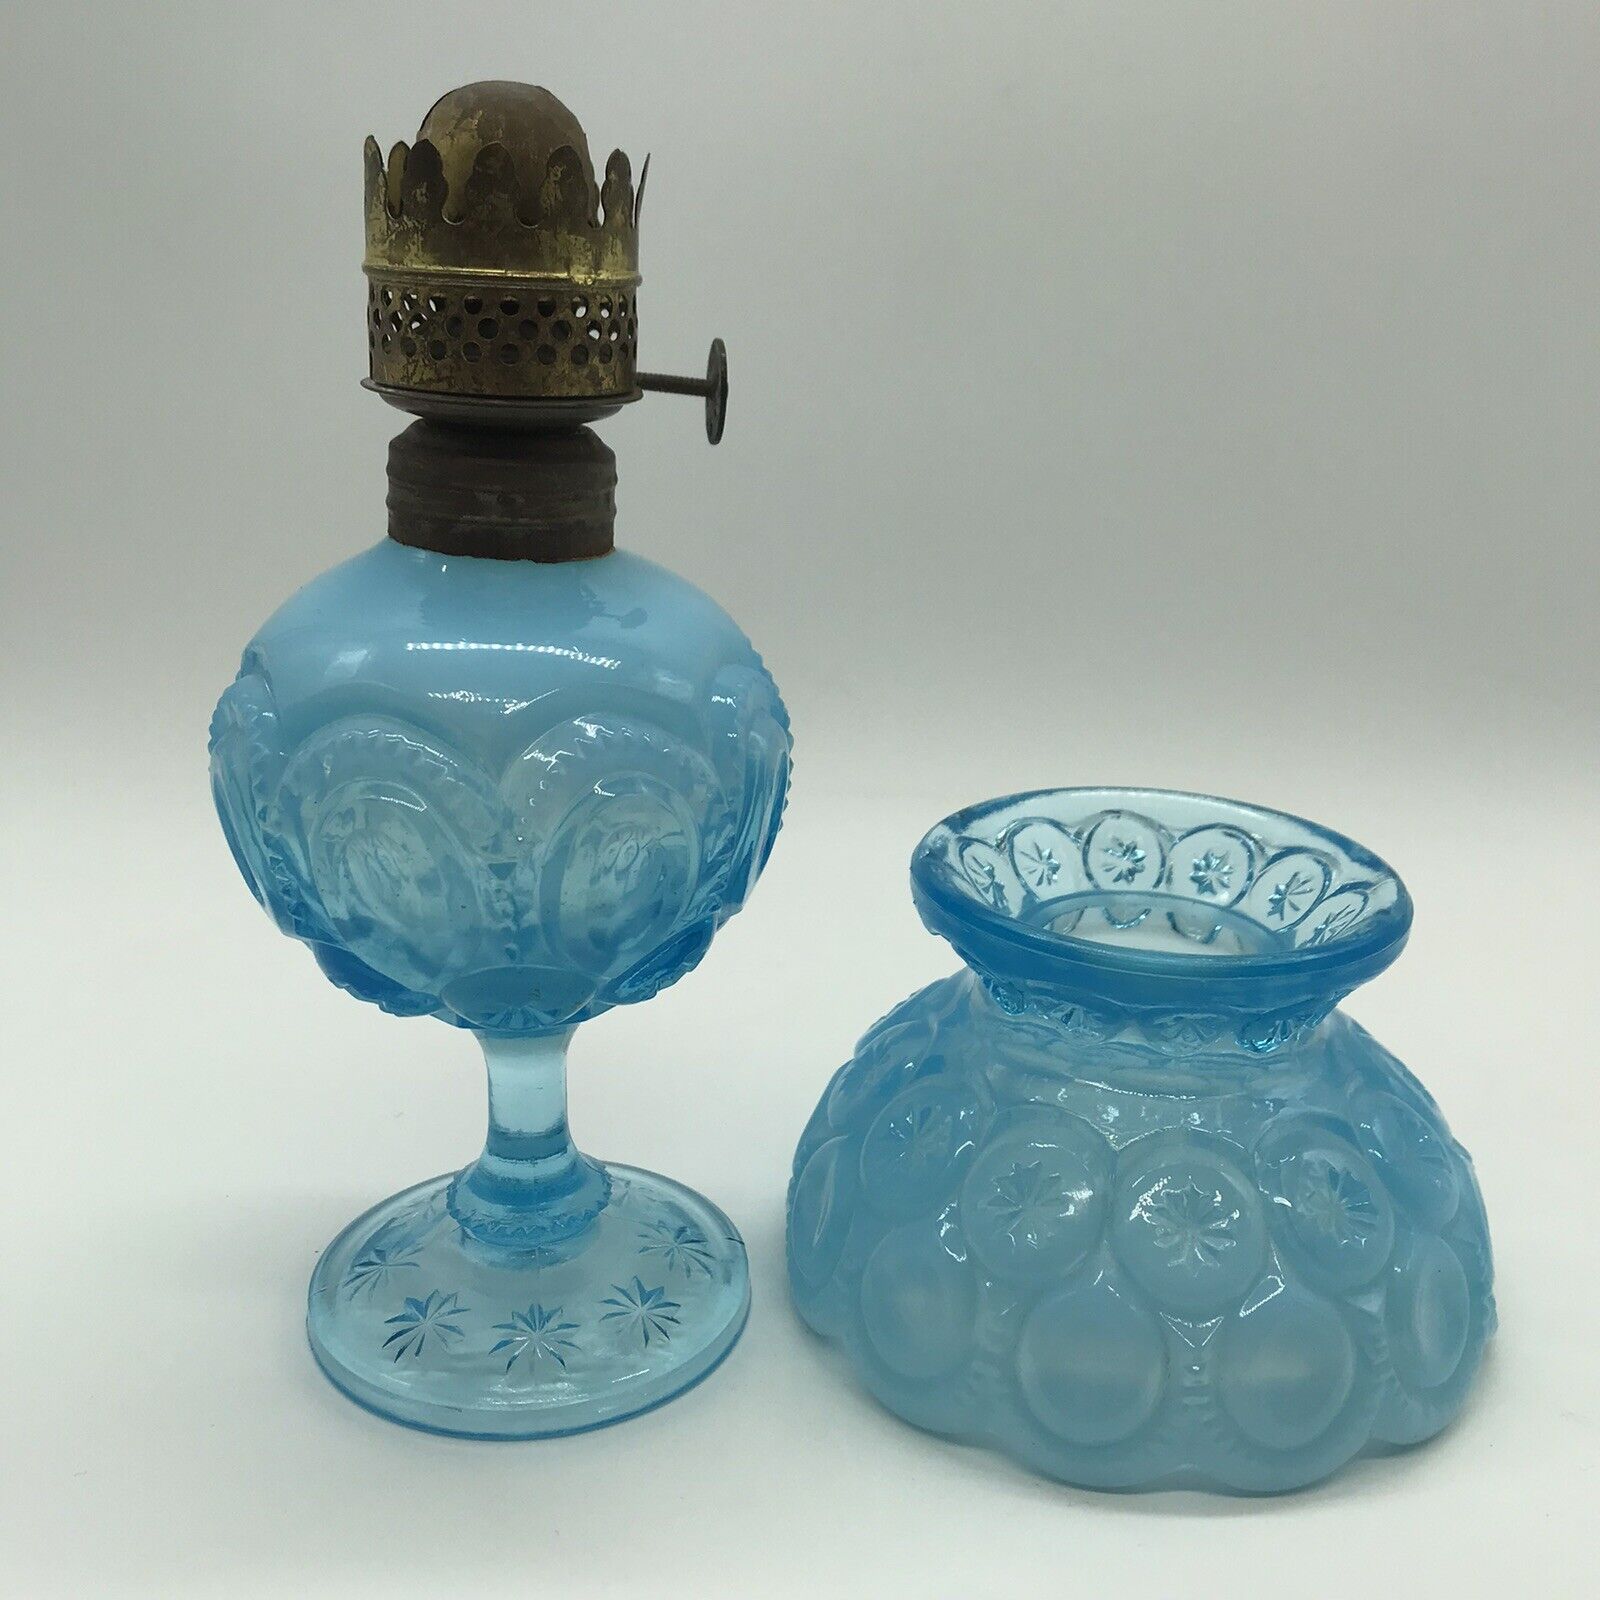 SET OF 2 MOON & STAR MINIATURE OIL LAMP & SHADES LG WRIGHT OPALESCENT 1950s